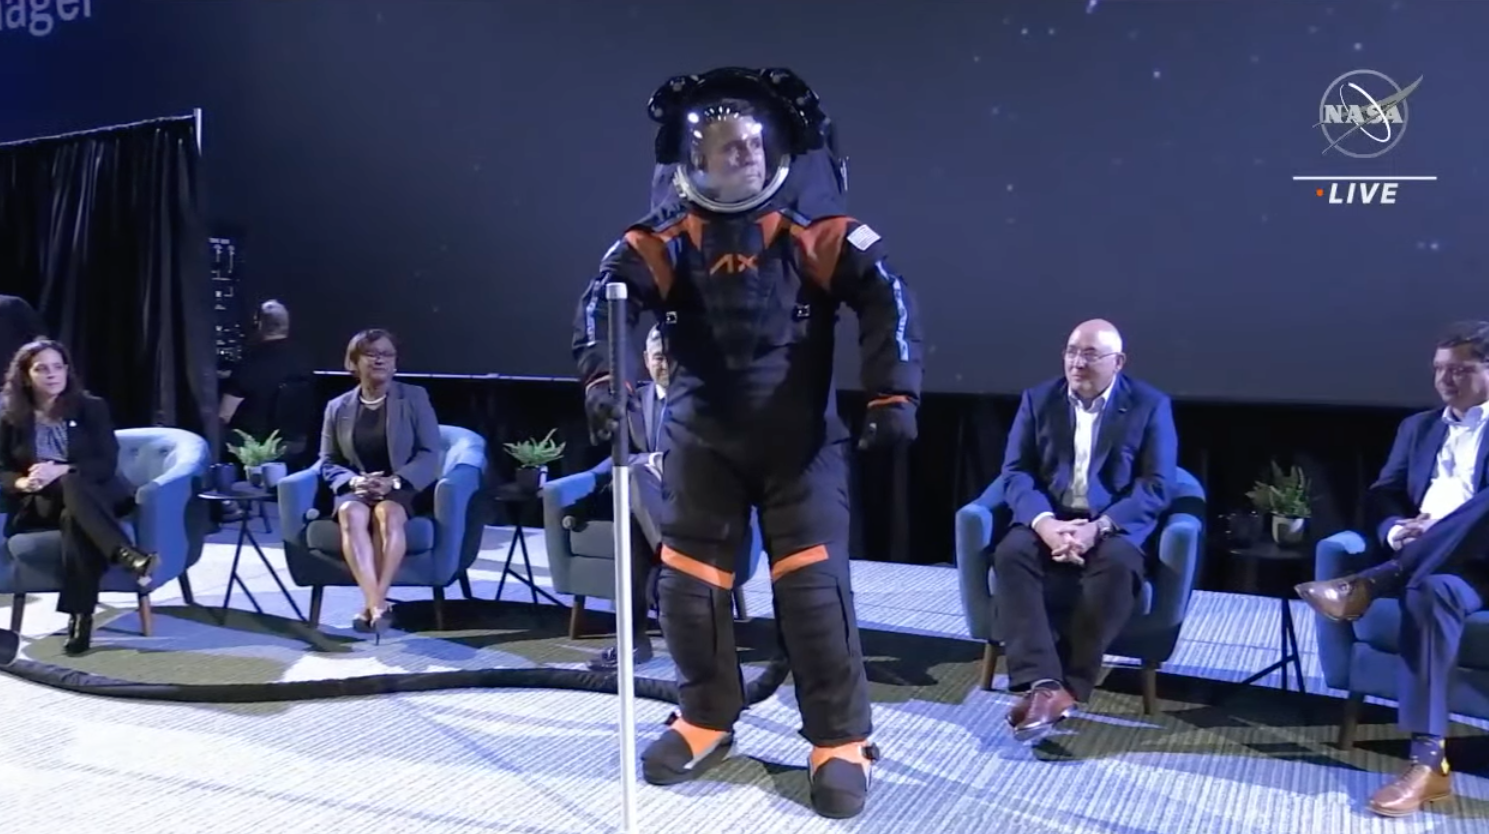 Jim Stein modelling the spacesuit during the event. (Screenshot: NASA TV)